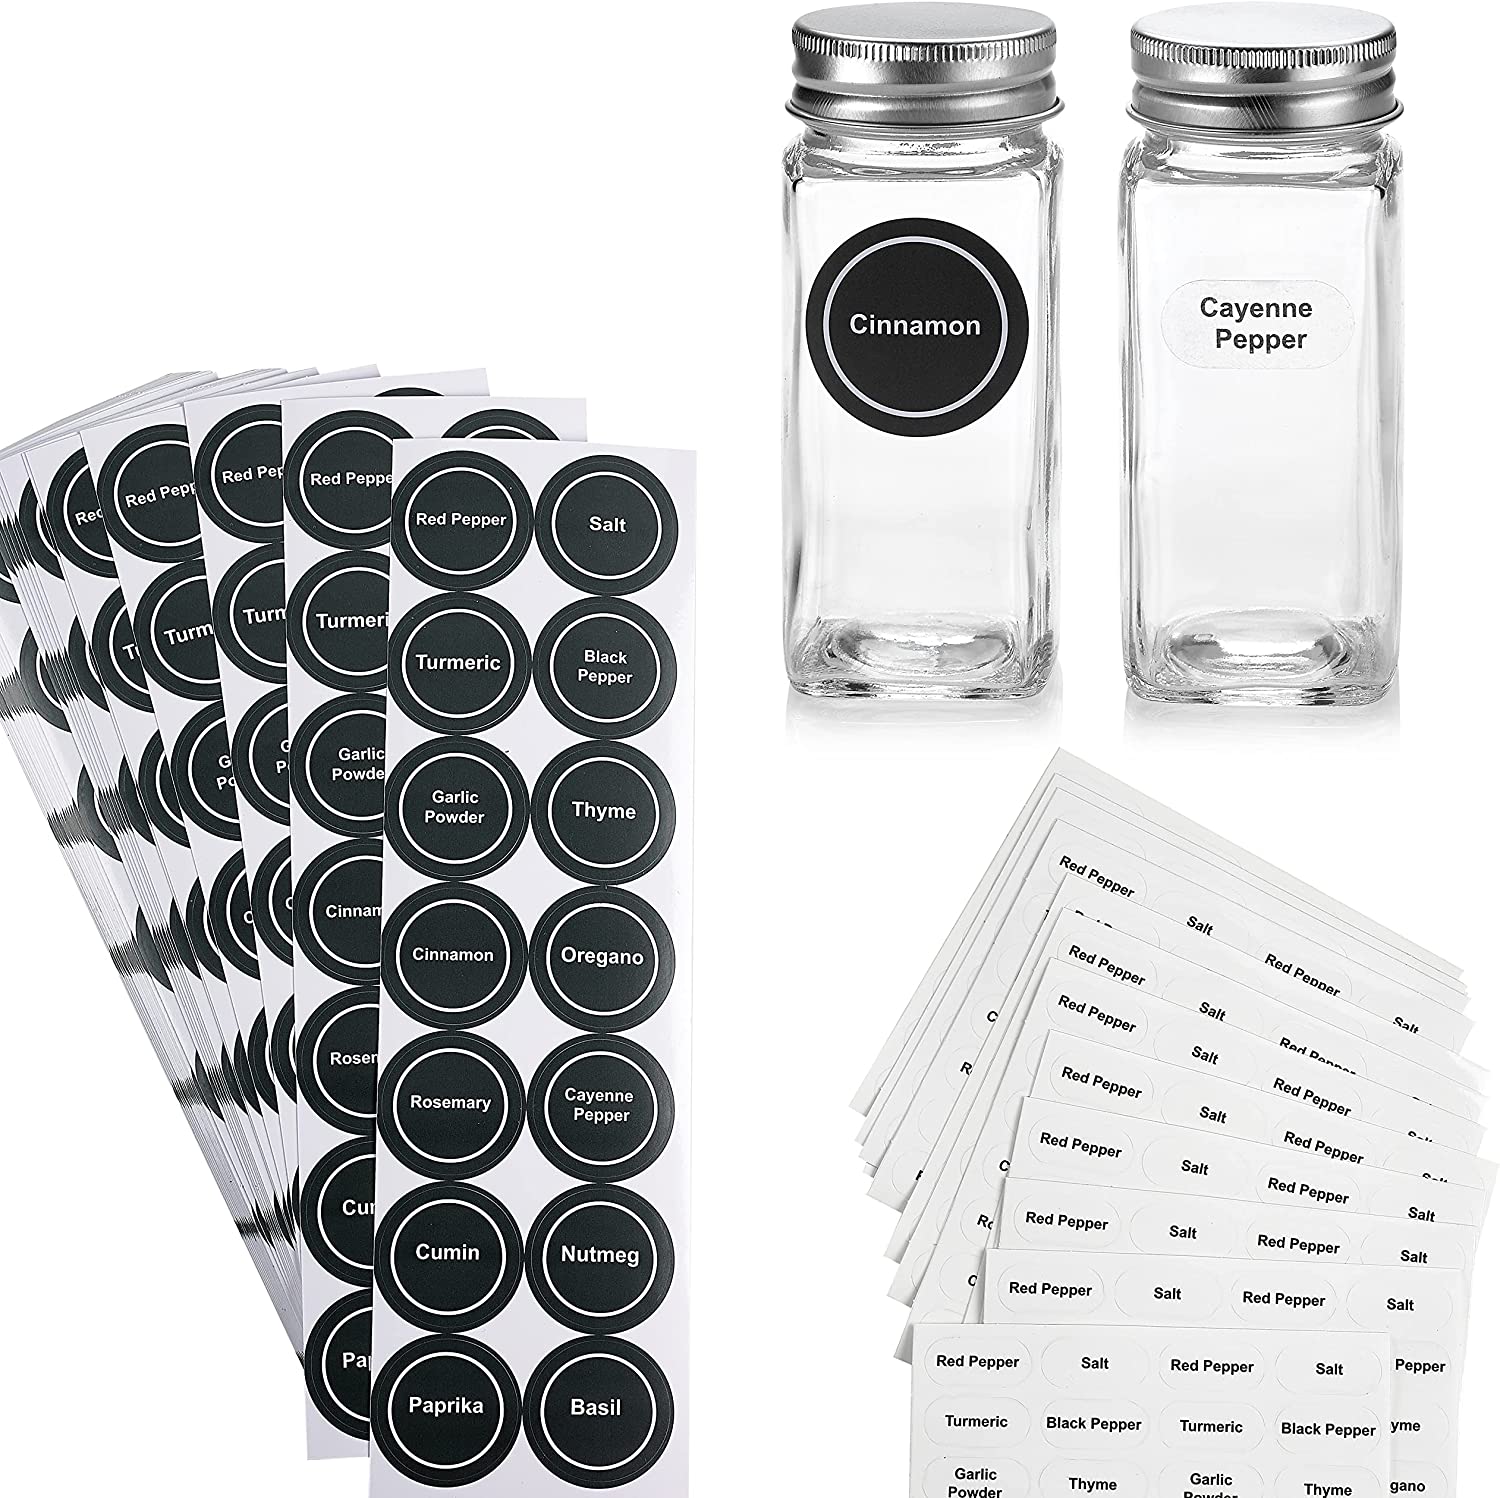 Spice Bottles Empty Glass with Labels 4 oz - 24 Piece Spice Jars Spice Container Shaker Lids, Airtight Metal Caps and Chalkboard/Clear PVC Seasoning Labels, Chalk Marker & Collapsible Funnel - image 2 of 10